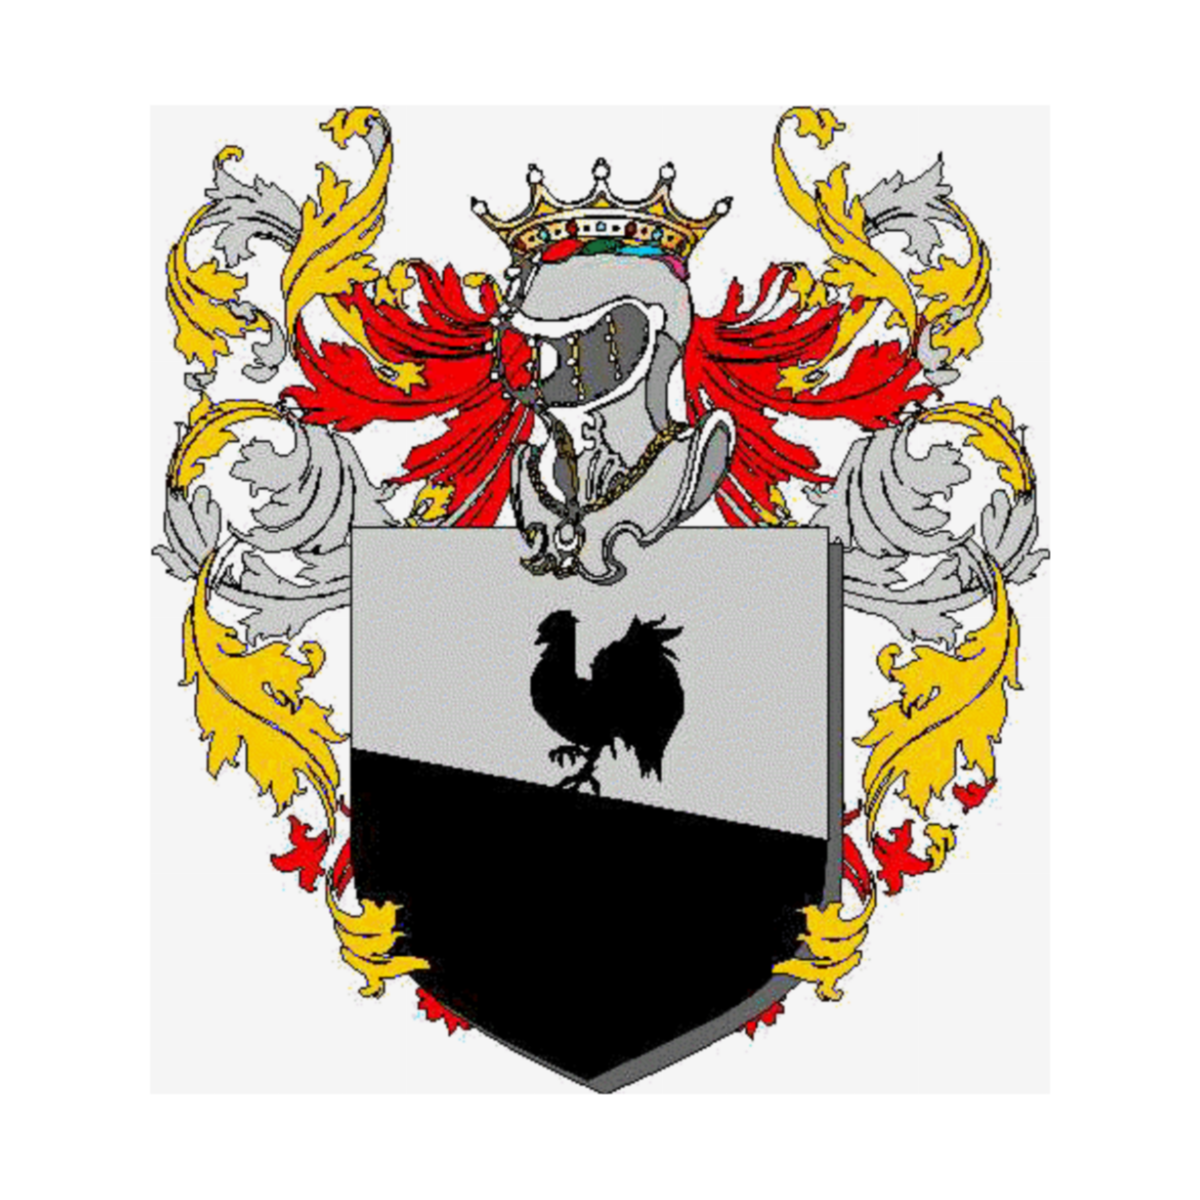 Coat of arms of familyGalletti